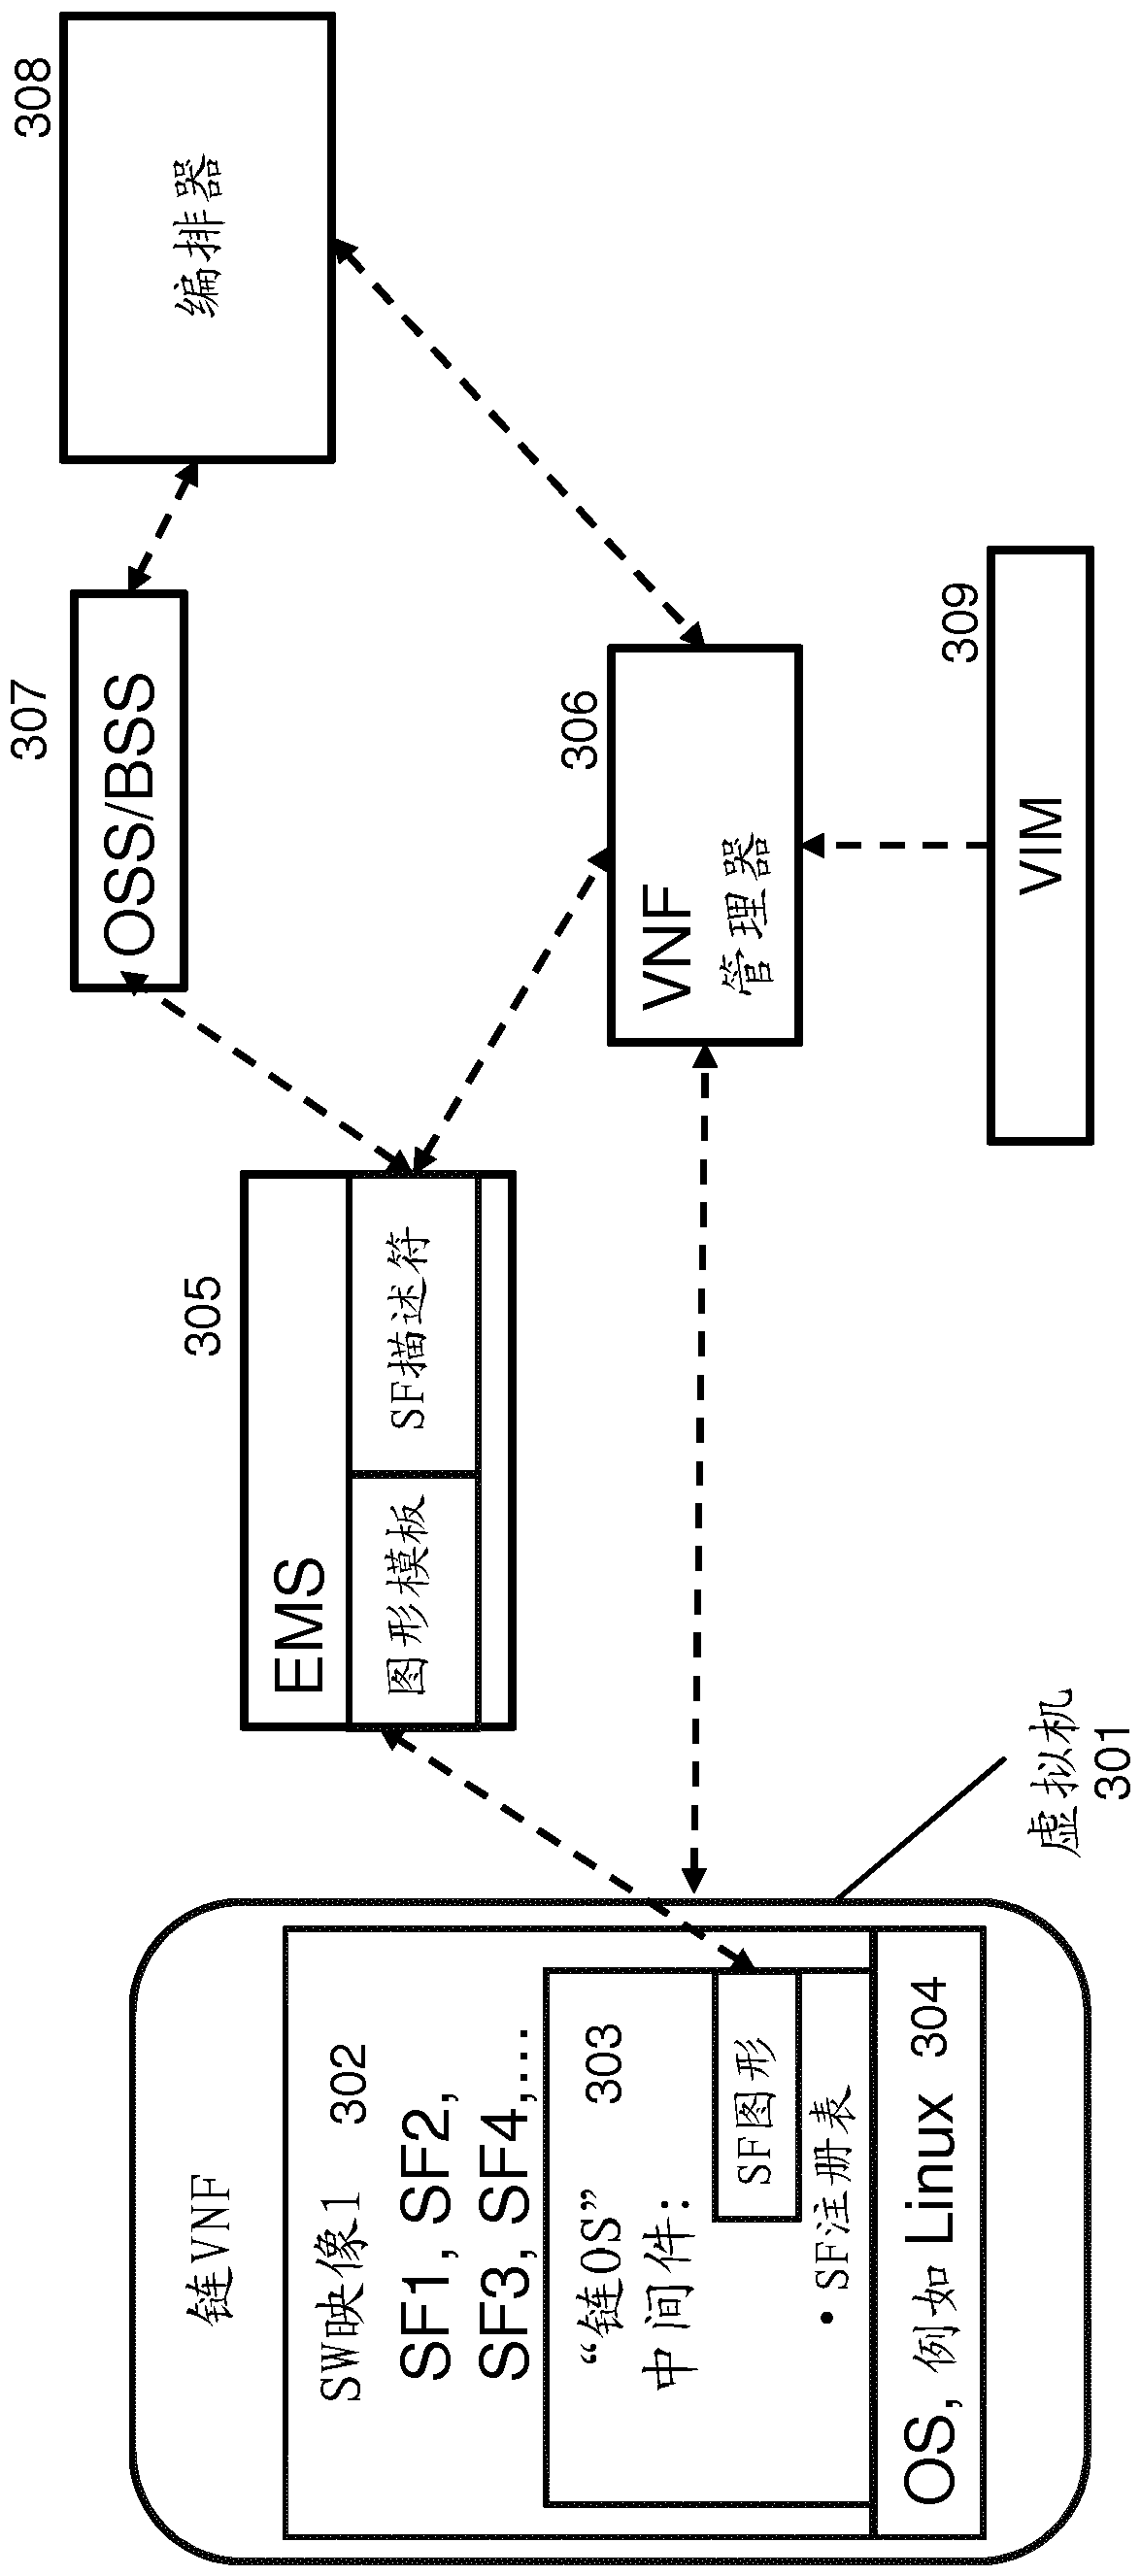 Load and software configuration control among composite service function chains